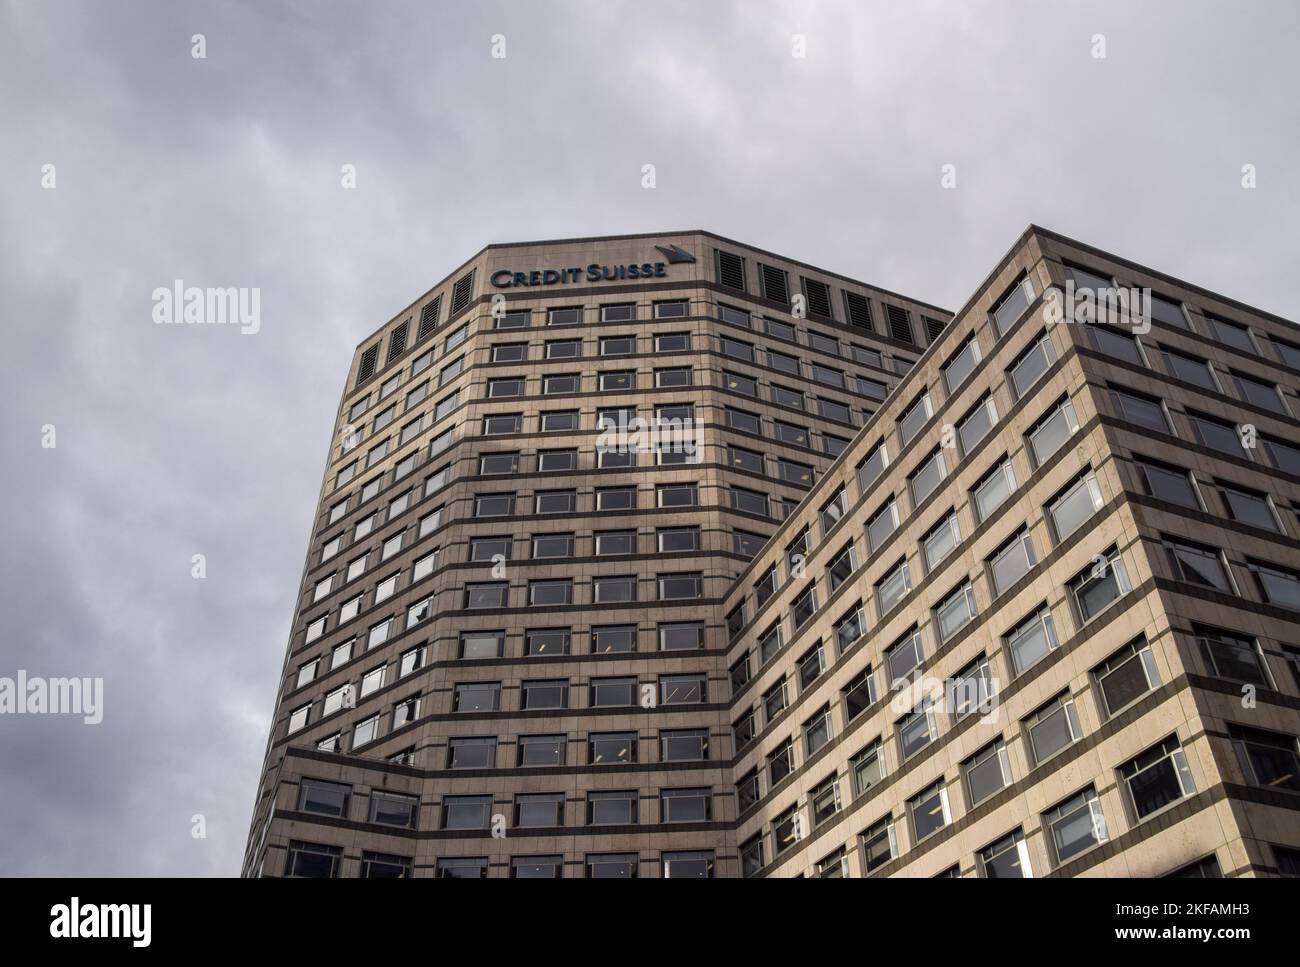 London, UK. 17th Nov, 2022. General view of Credit Suisse UK headquarters in Canary Wharf. Credit: SOPA Images Limited/Alamy Live News Stock Photo